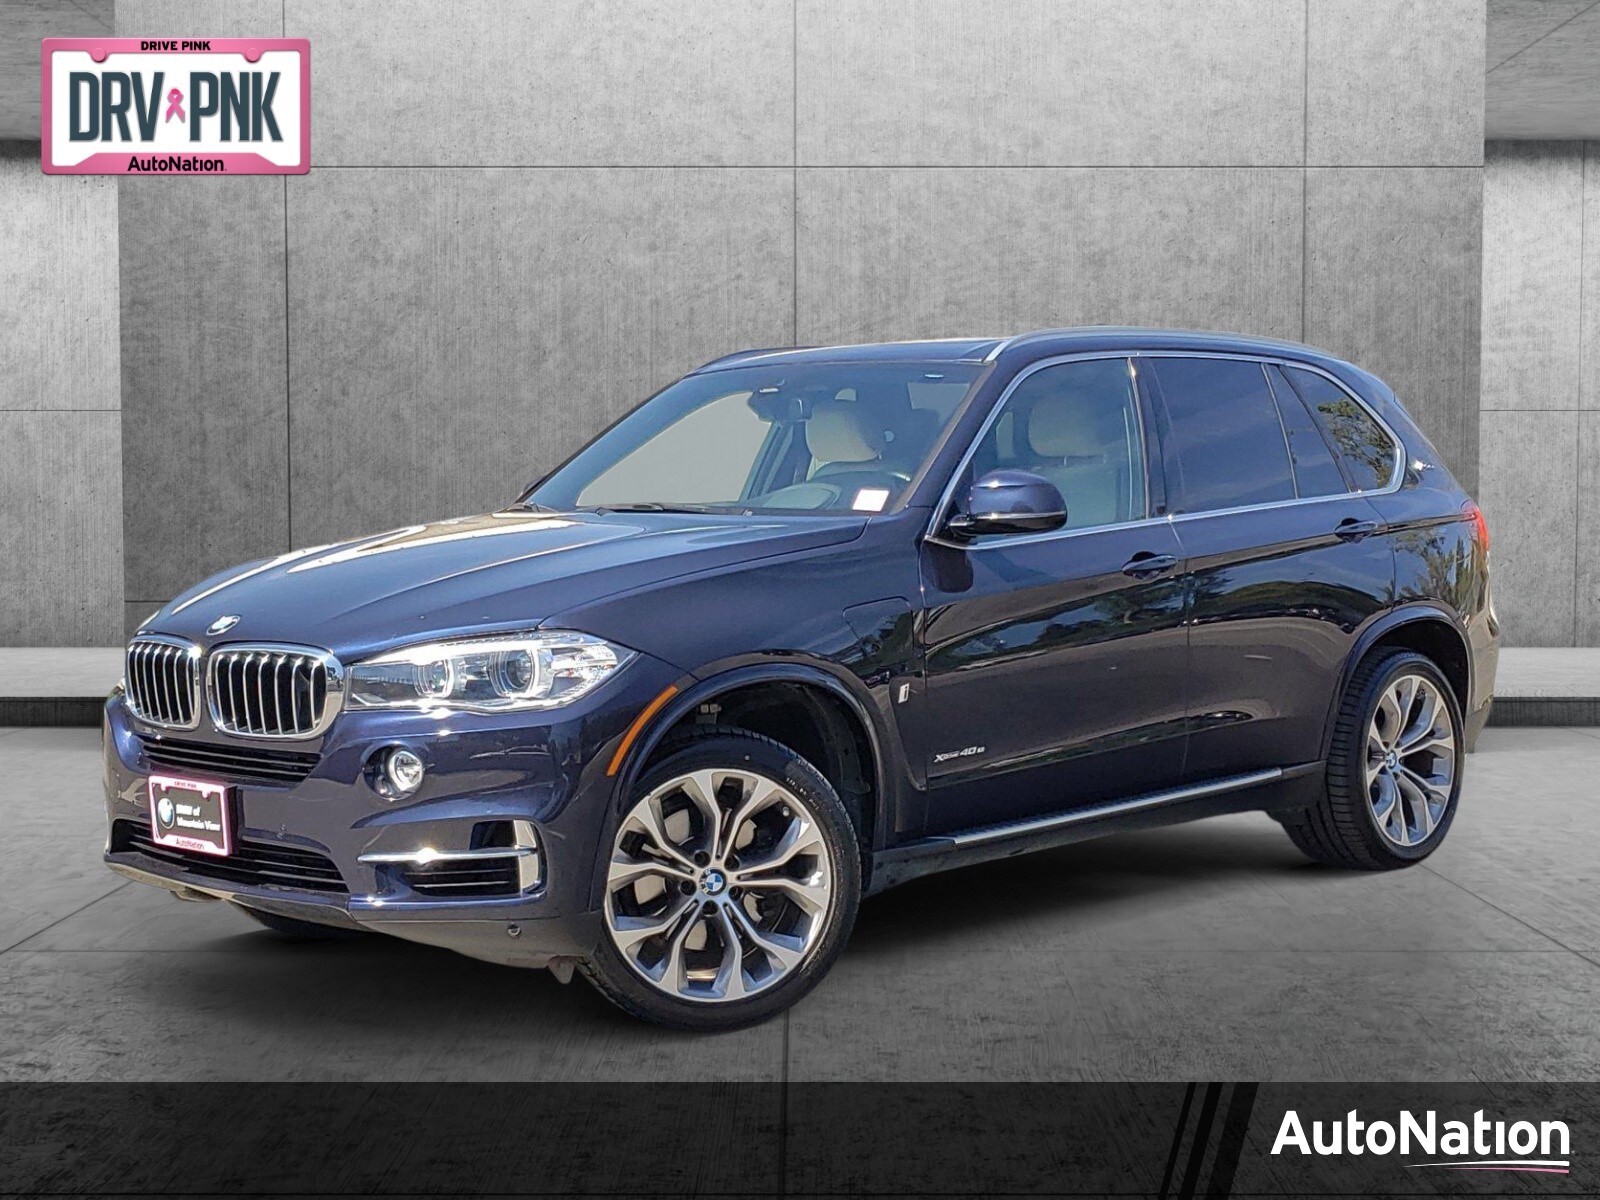 Used Bmw X5 Mountain View Ca